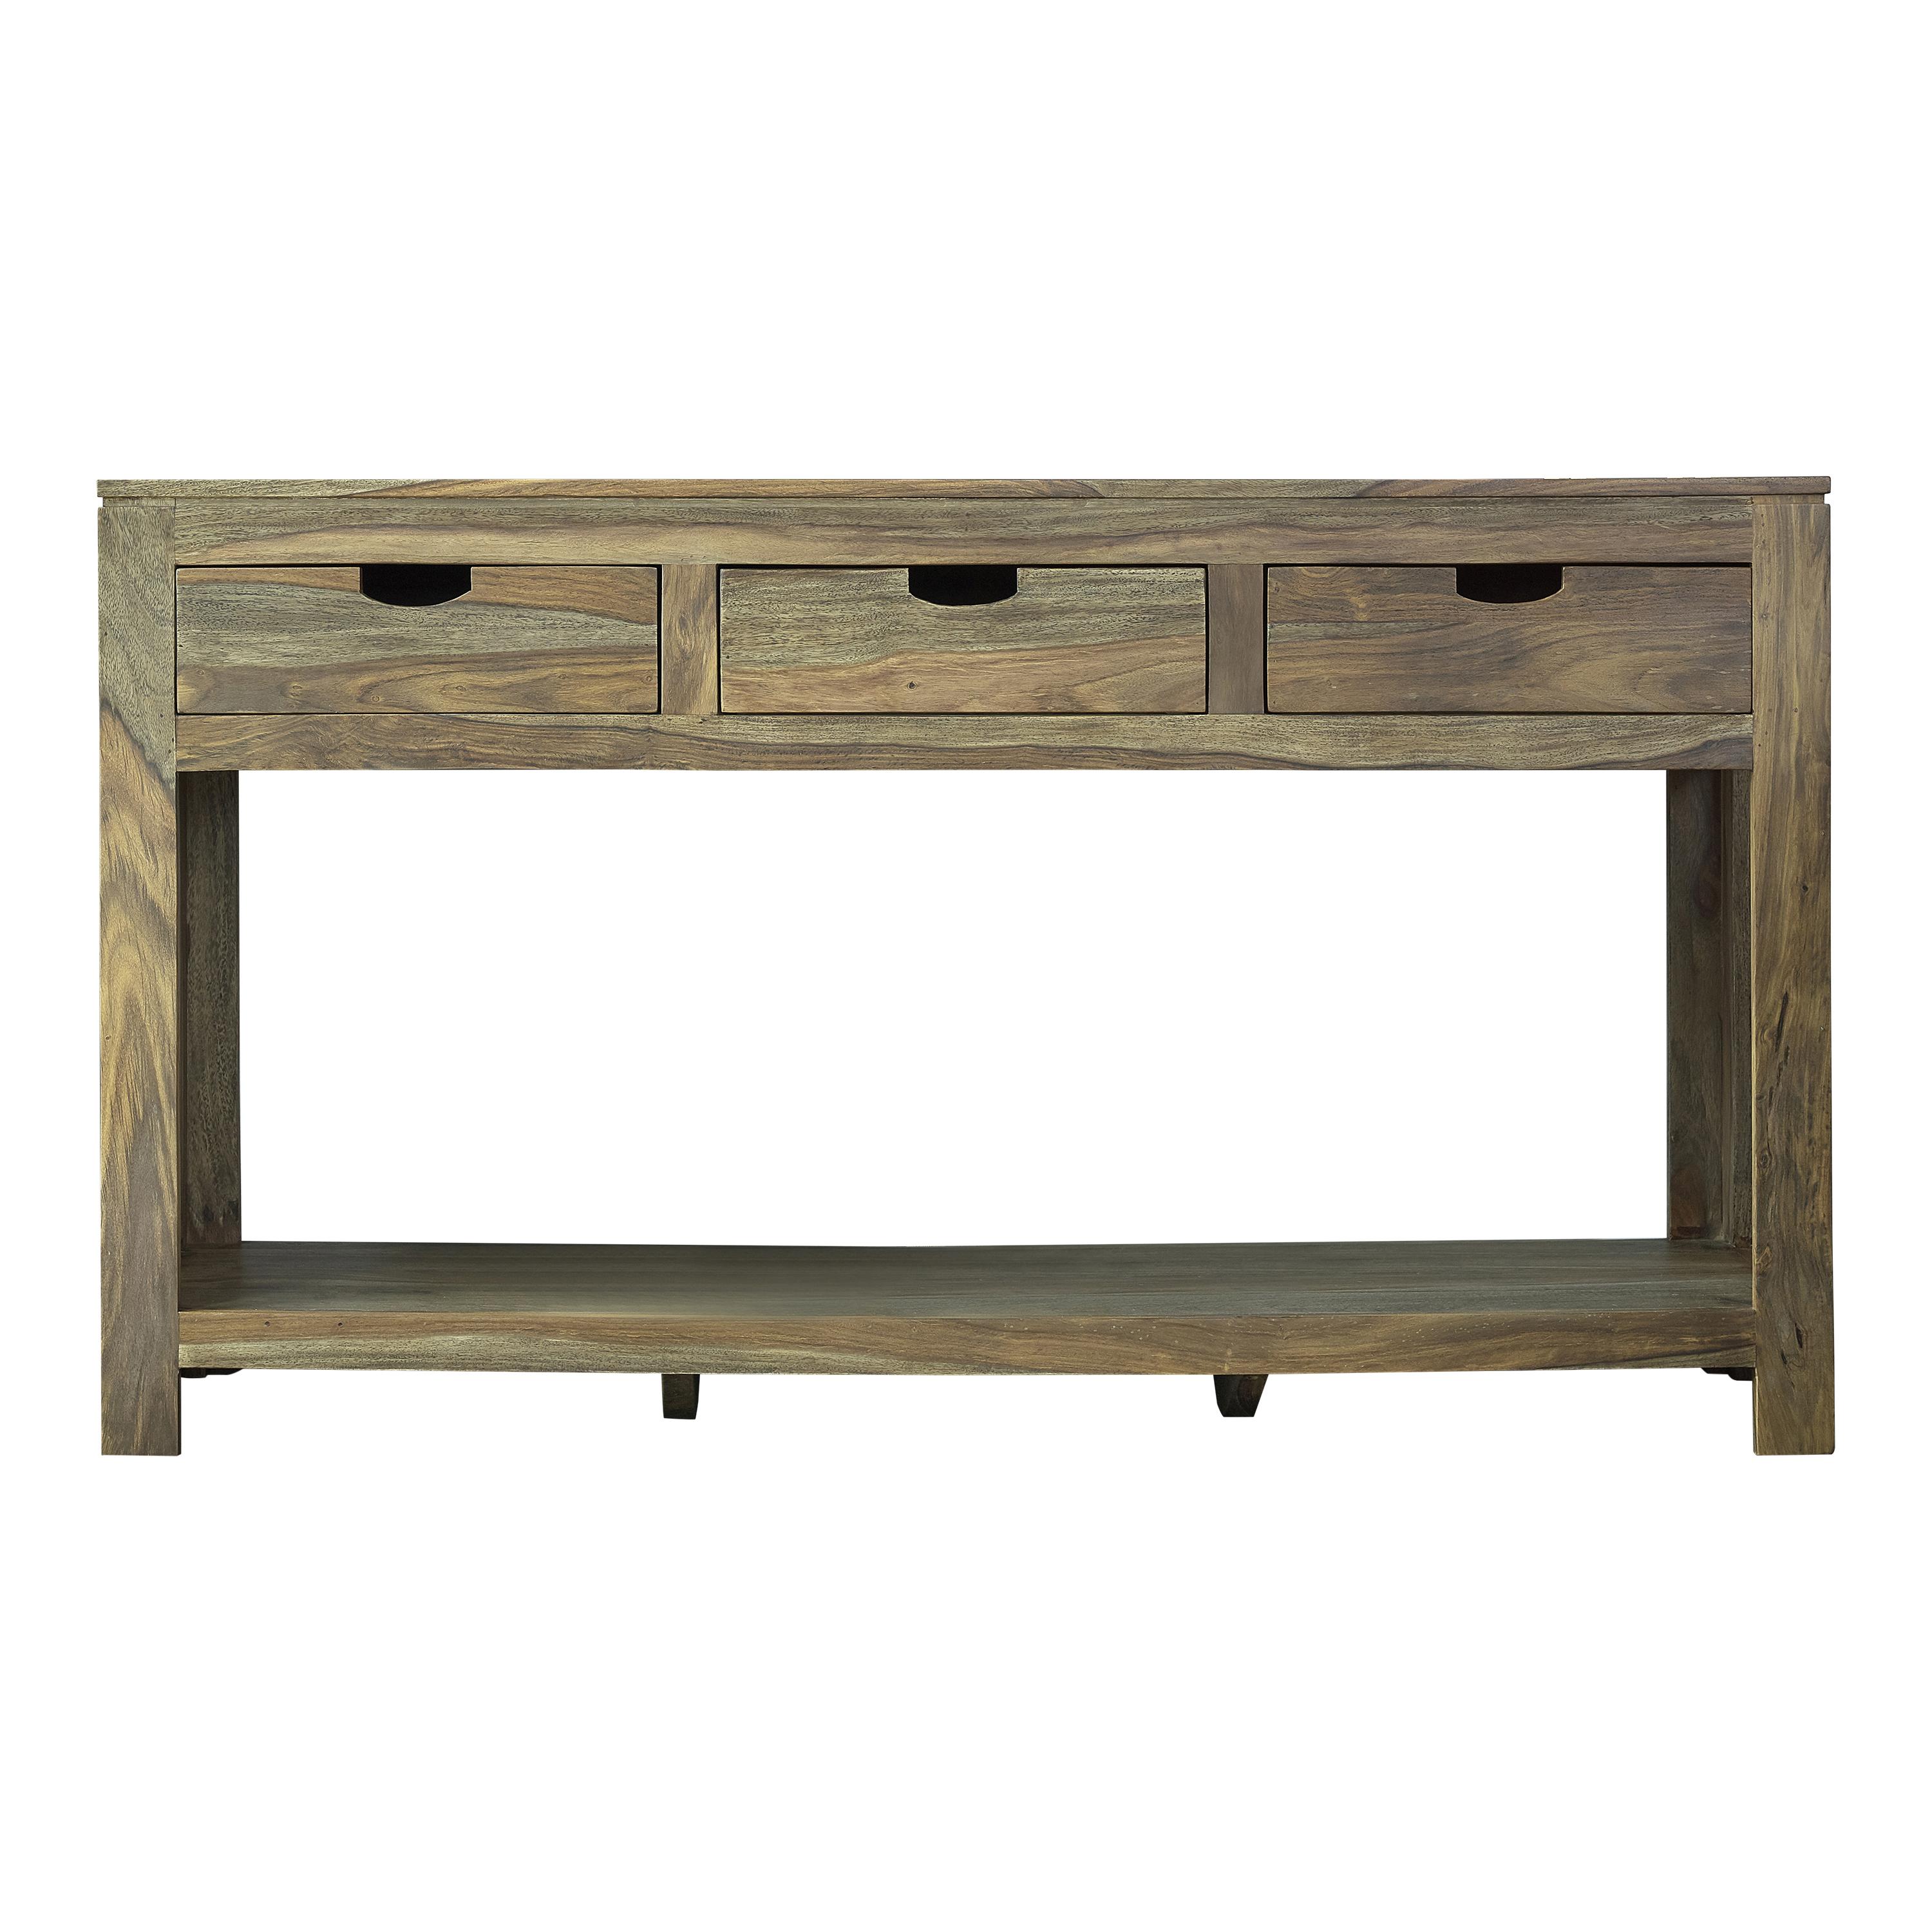 Rustic Console Table 952853 952853 in Natural 